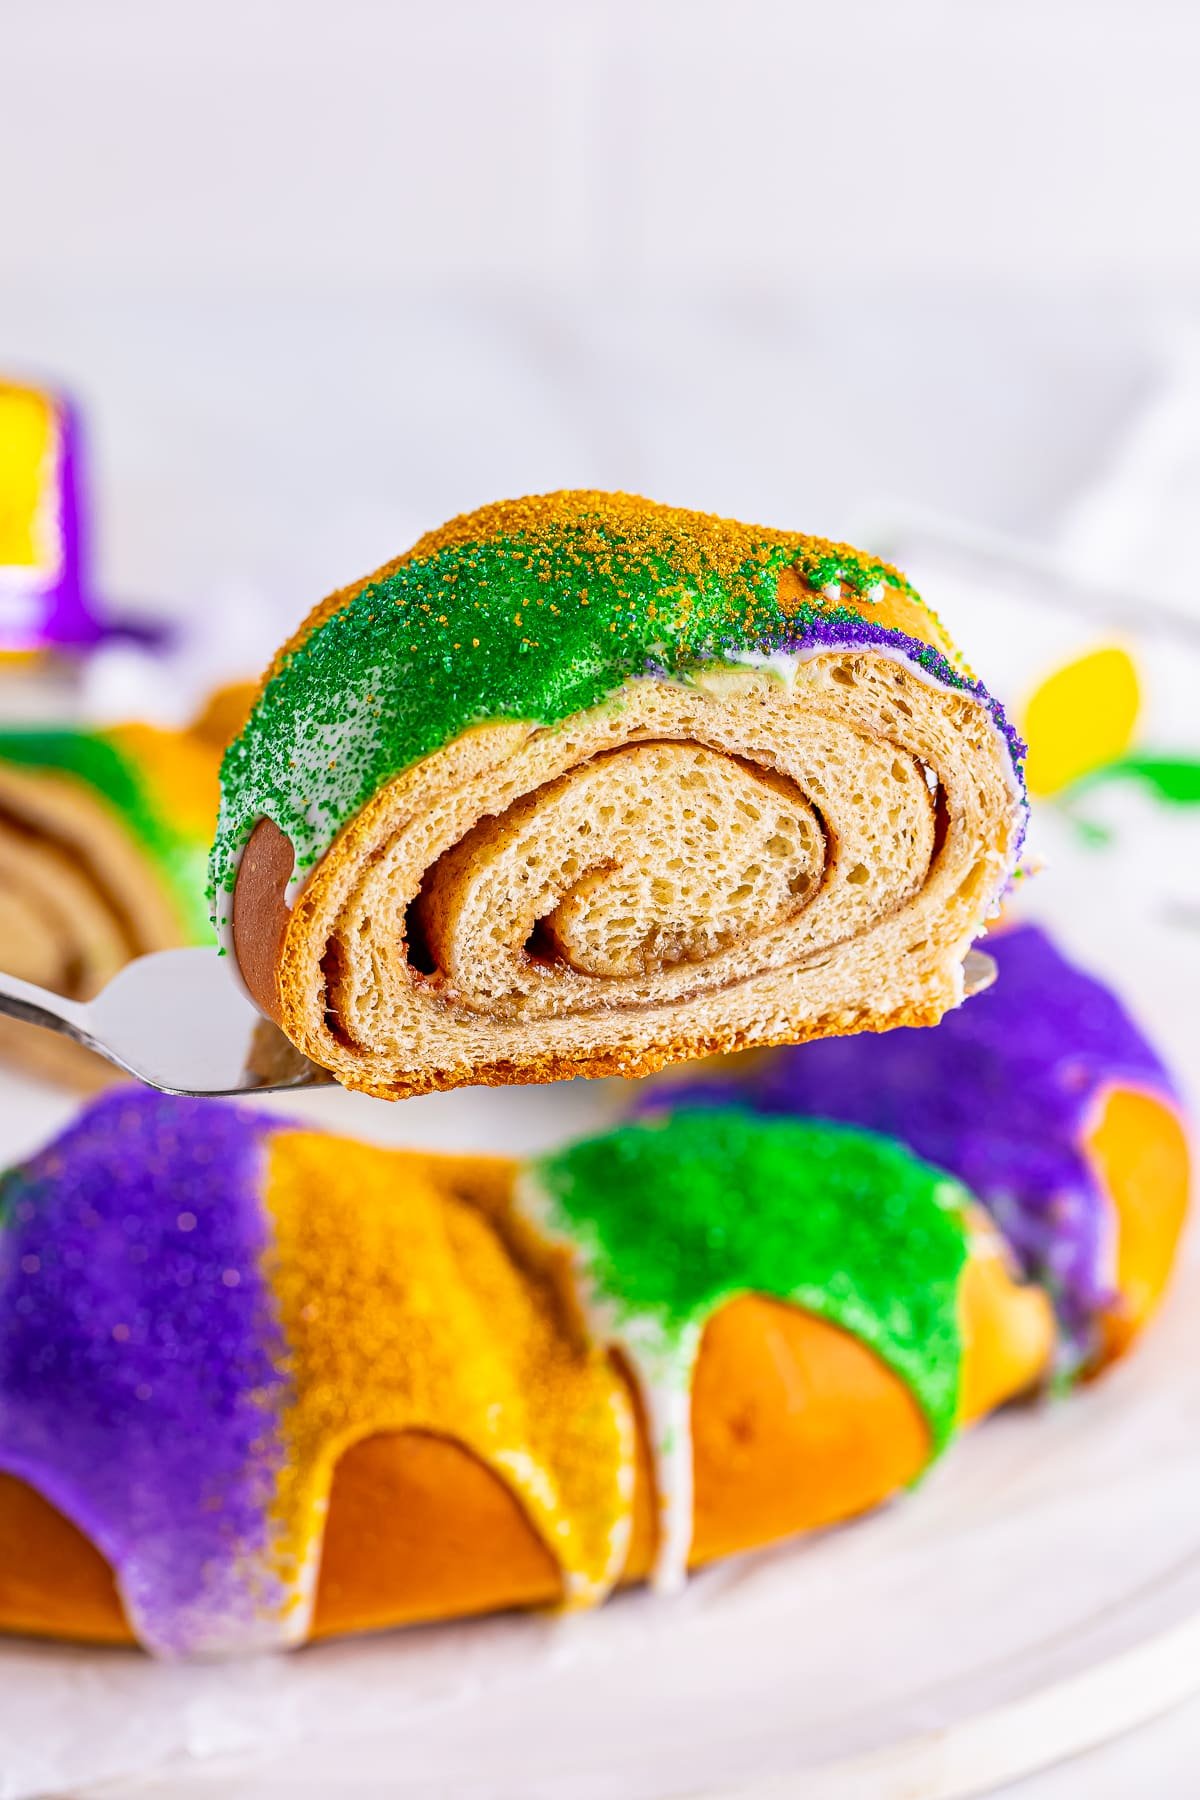 A slice of this King Cake Recipe on a cake server over the whole cake with white background.